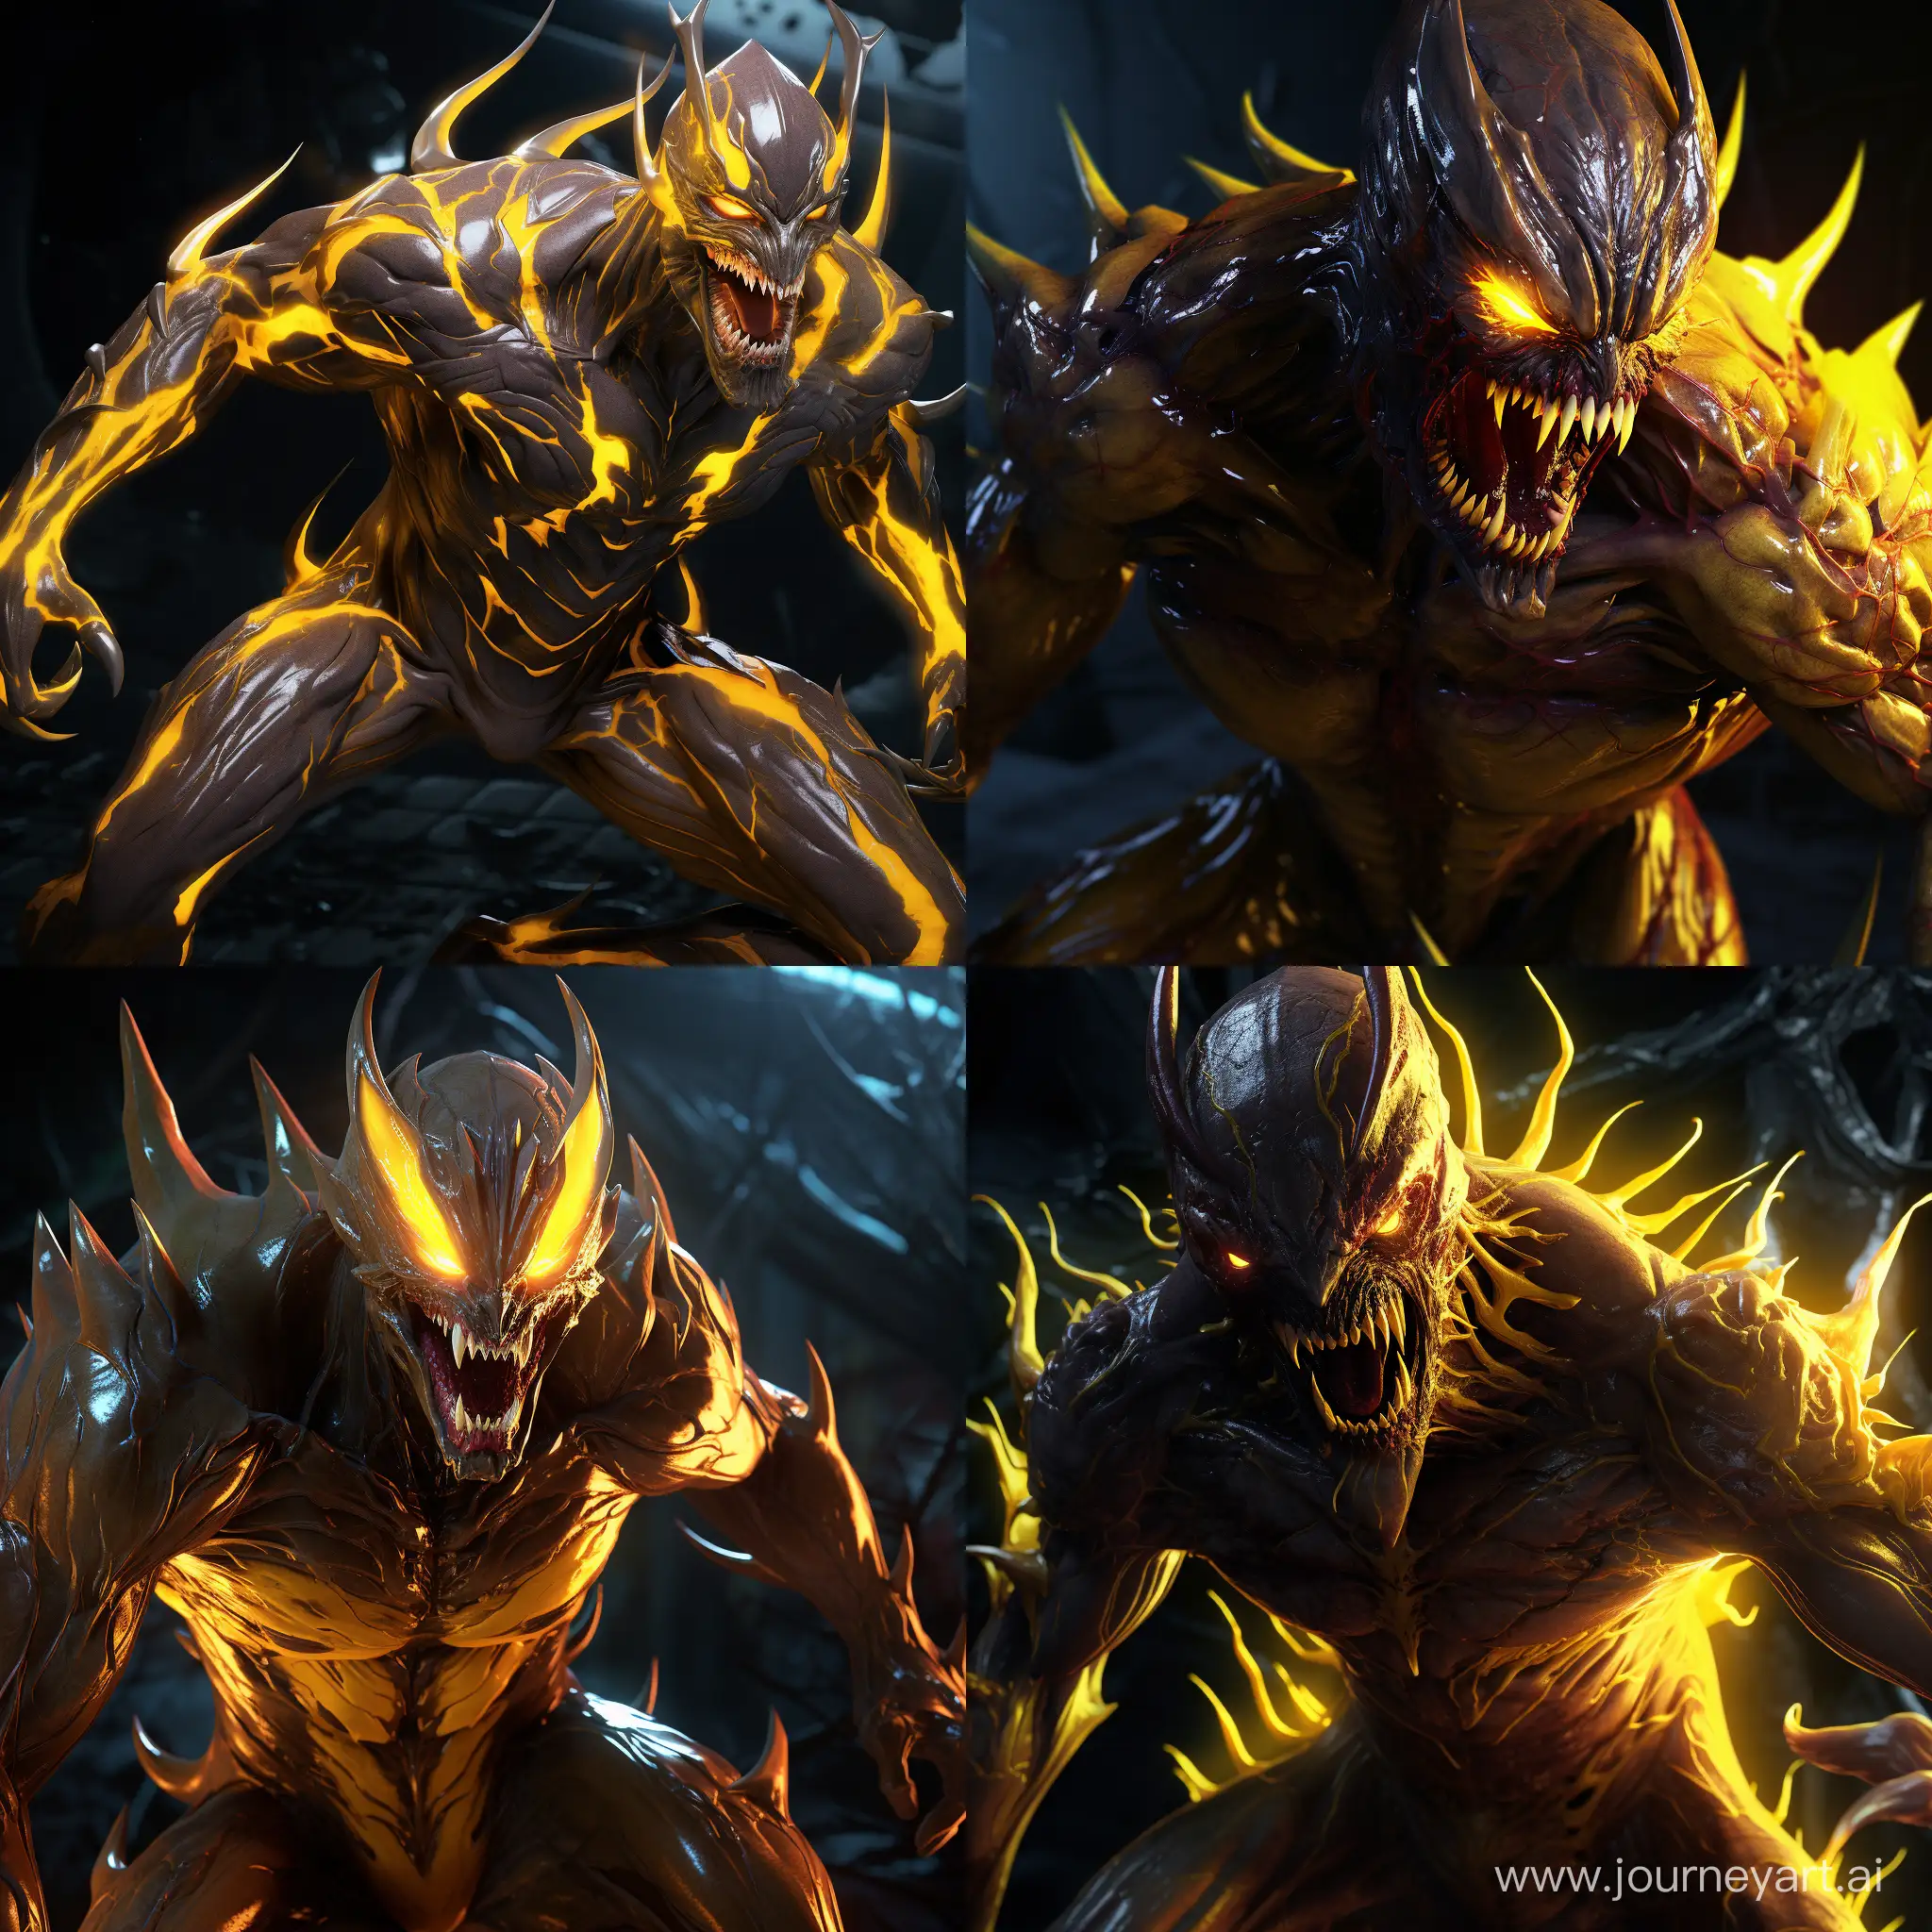 Venomized marvel’s Wolverine unhinged and psychotic, yellow glowing eyes, raised veins pulsating and emitting a yellow glow through his yellow suit, his claws are out, deranged, full body cinematic action shot, 70mm, well designed, 2.5D, ambient occlusion, color grading, 16k